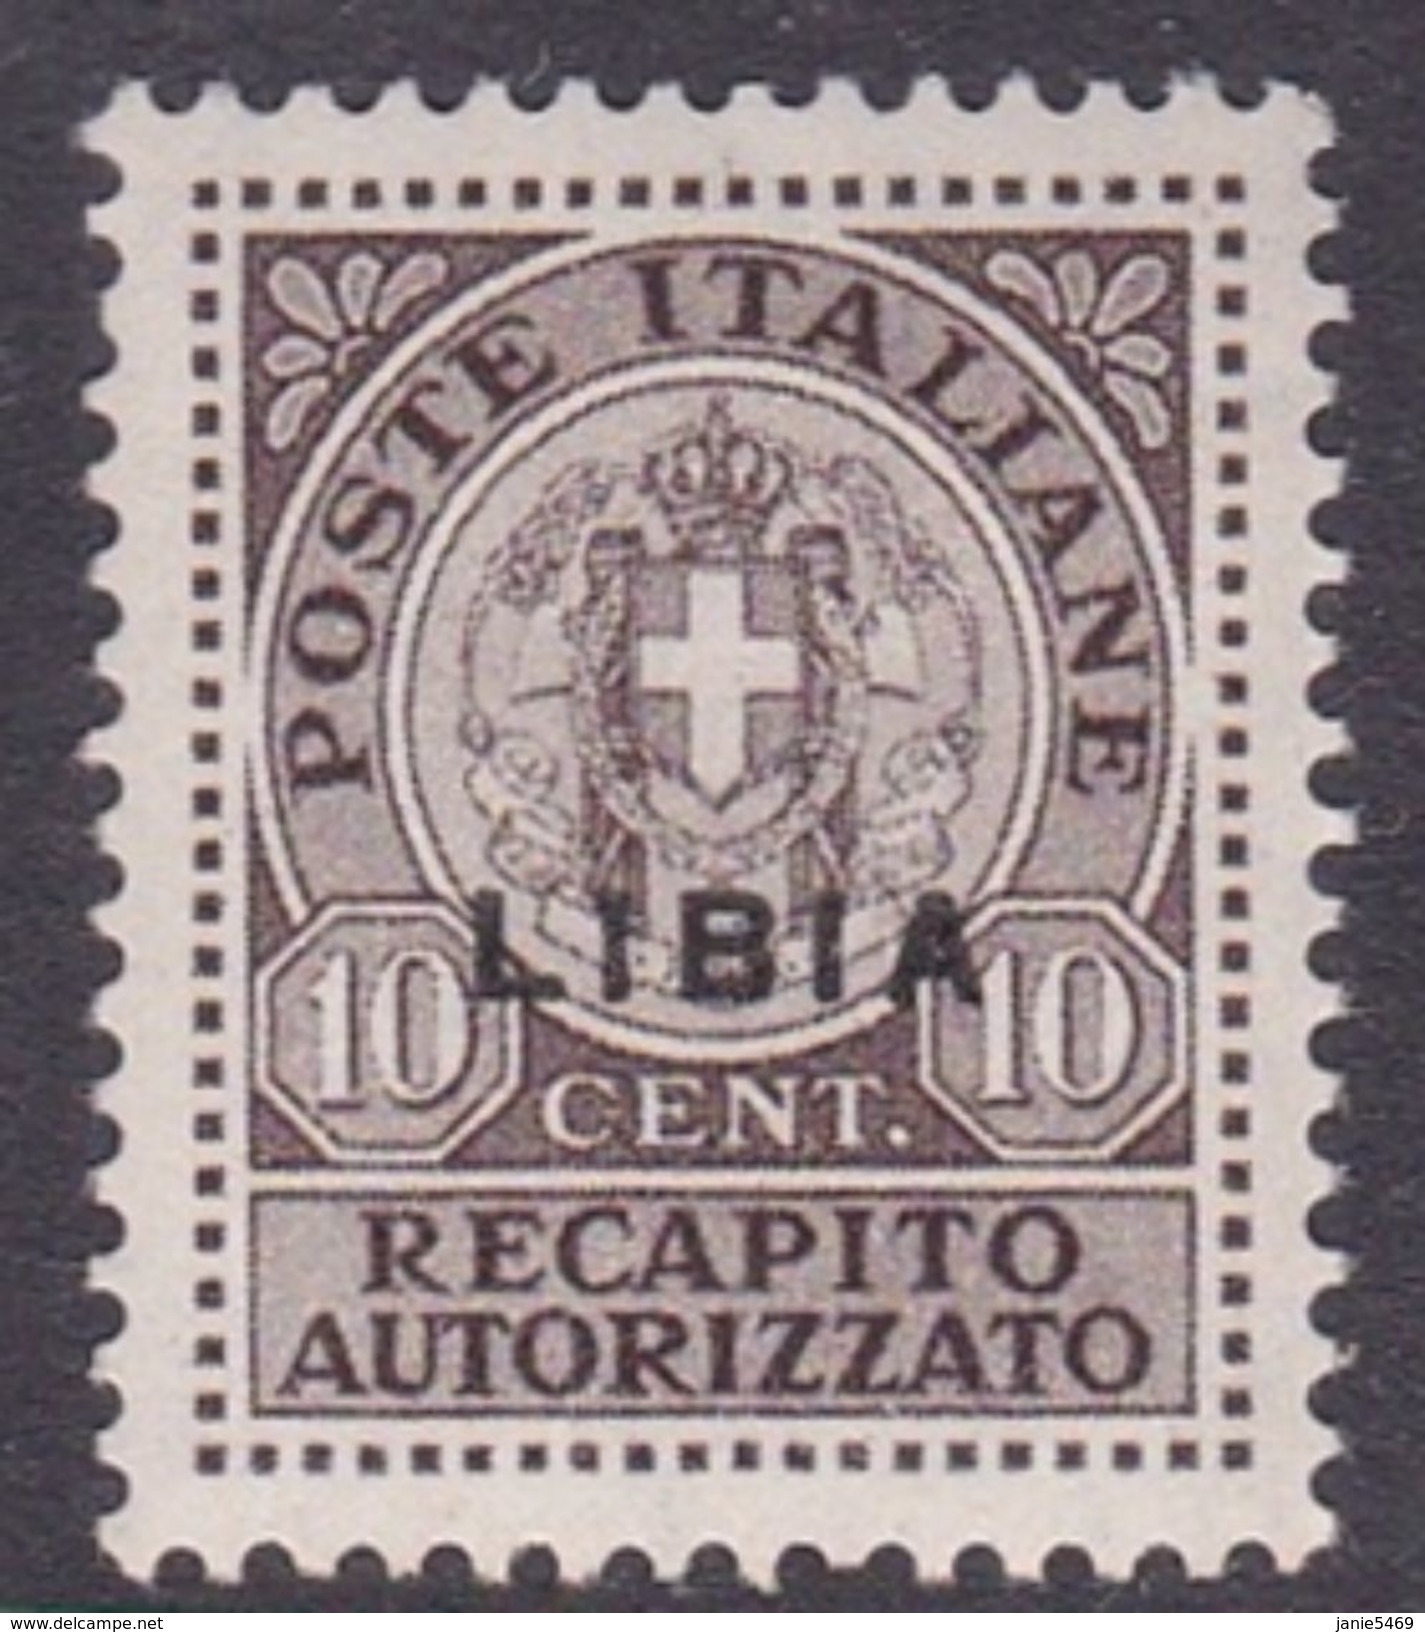 Italy-Colonies And Territories-Libya RA 4 1942 Authorized Delivery Stamp 10c Brown, Mint Hinged - Libya